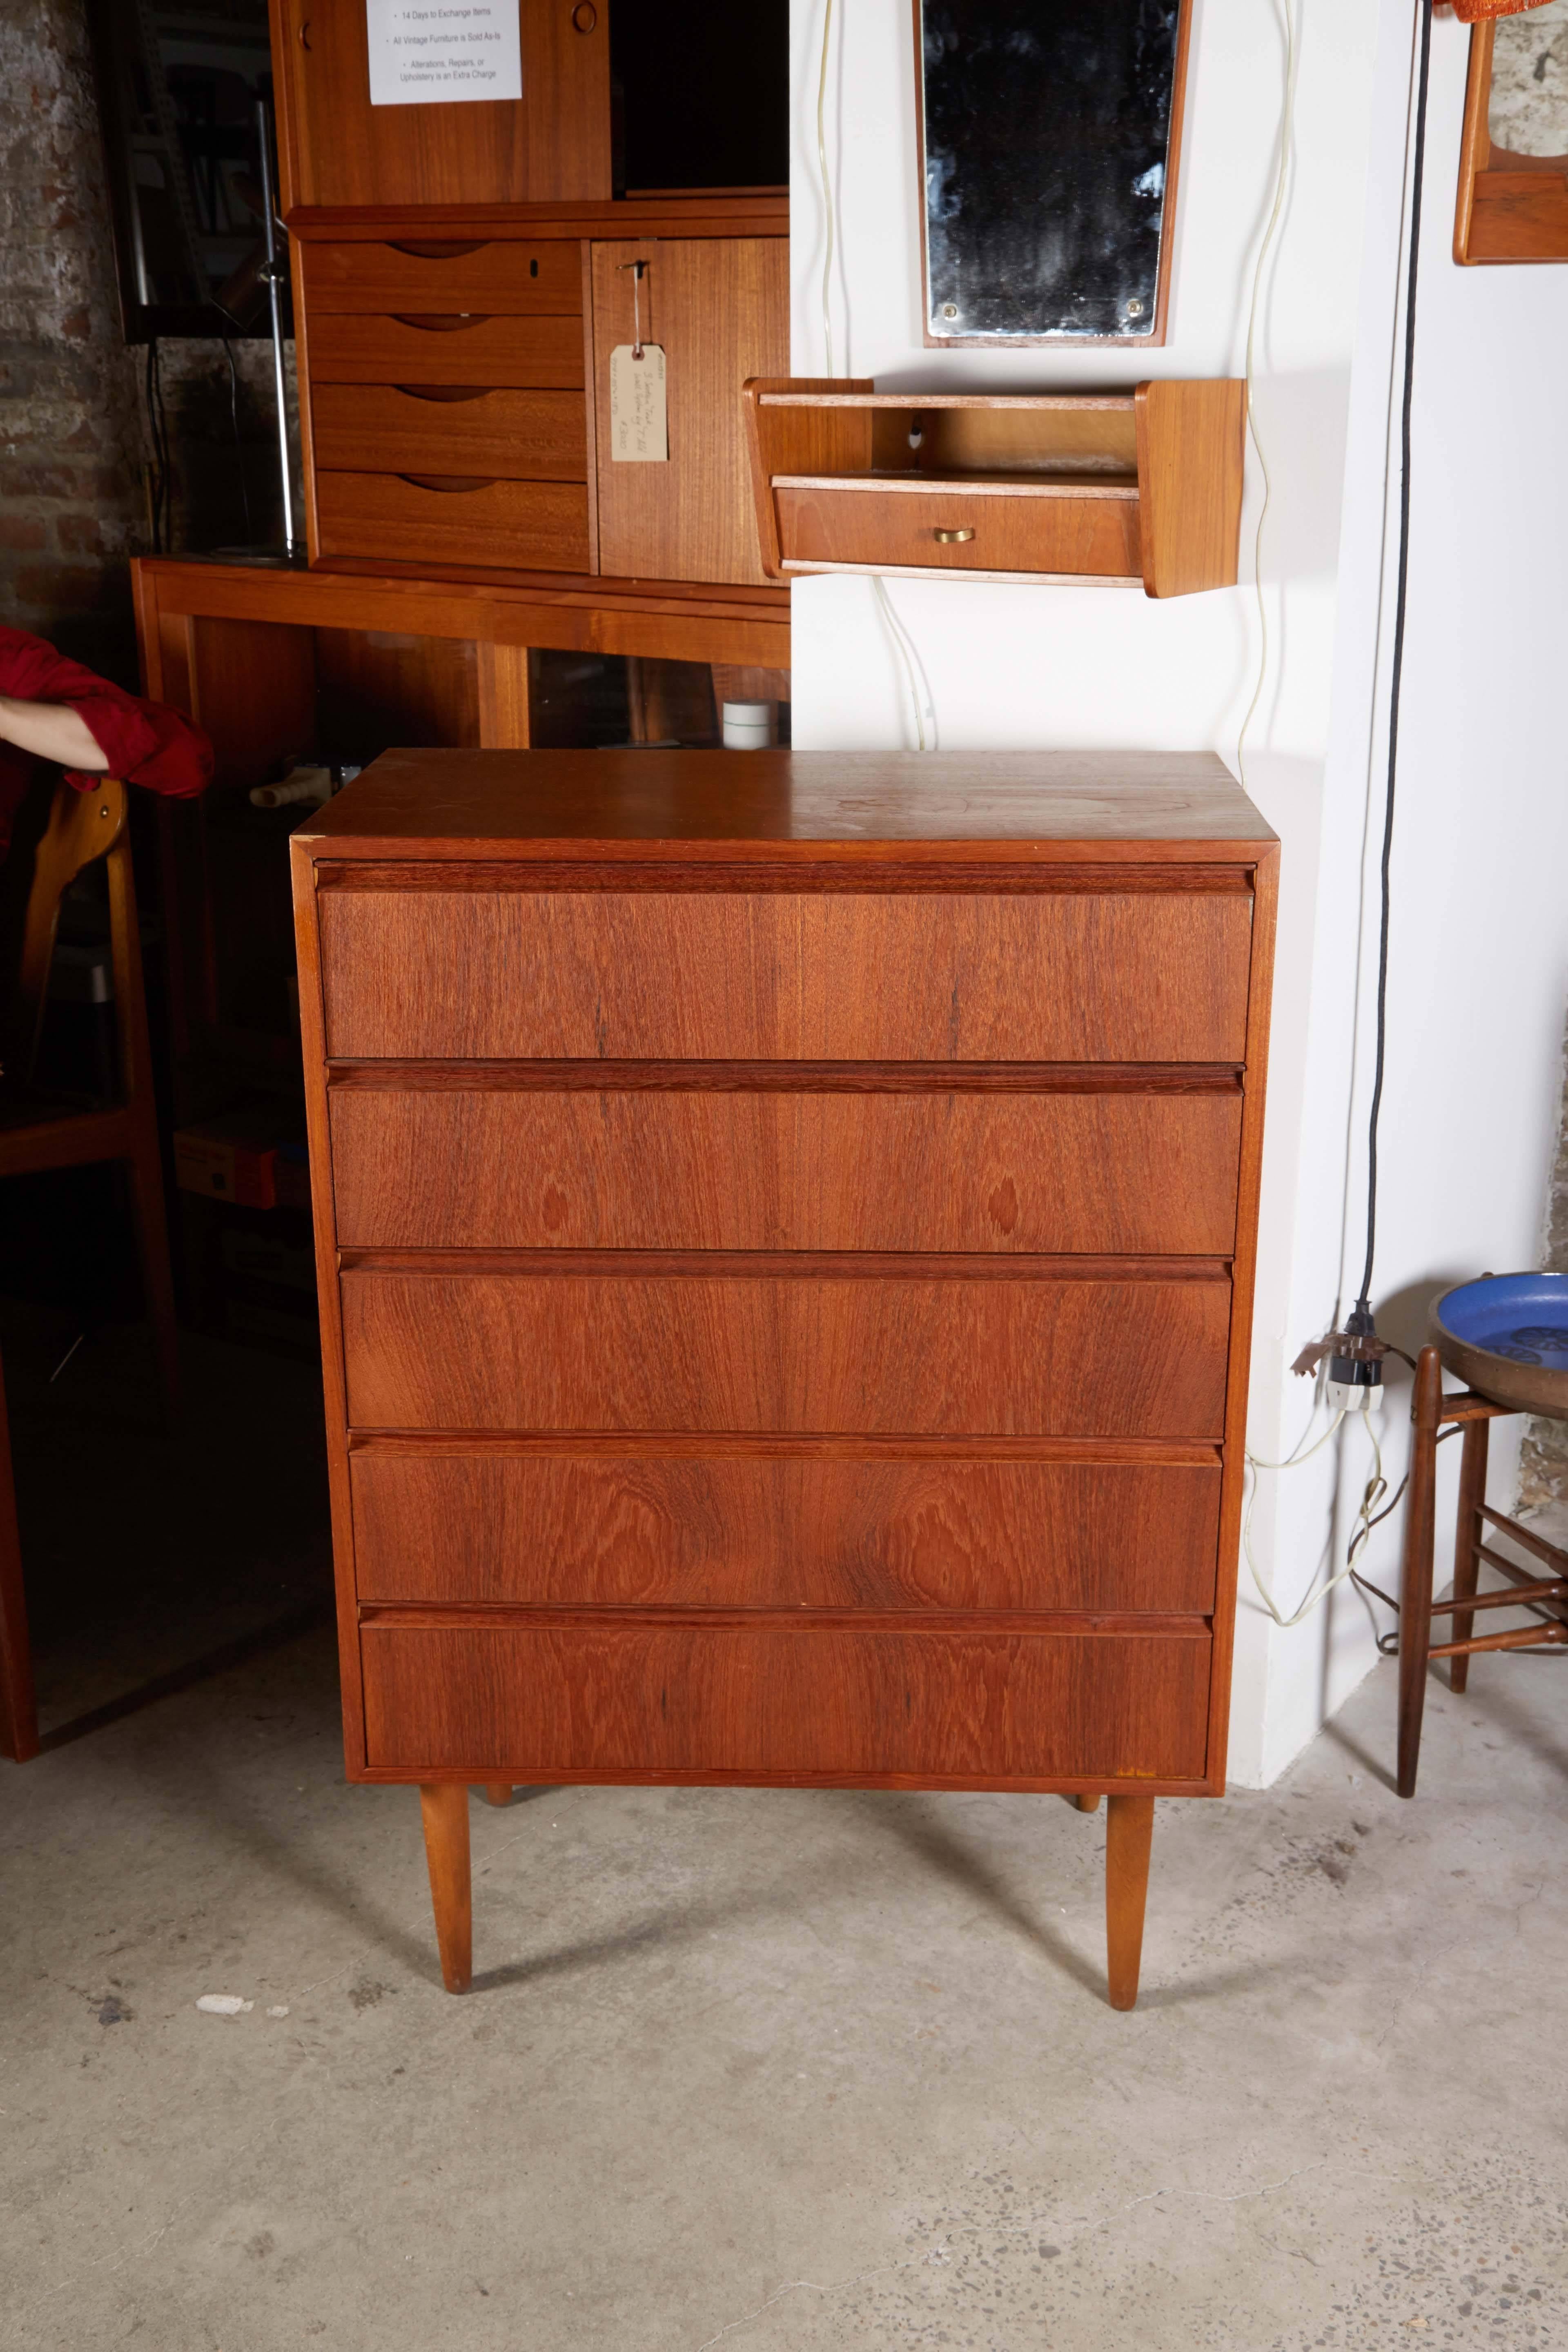 1960s Mid Century Teak Dresser

This small dresser is in excellent condition. Great for storage in any part of the home, not just the bedroom. I've been selling more and more dressers to people lately who use them in their living rooms and hallways